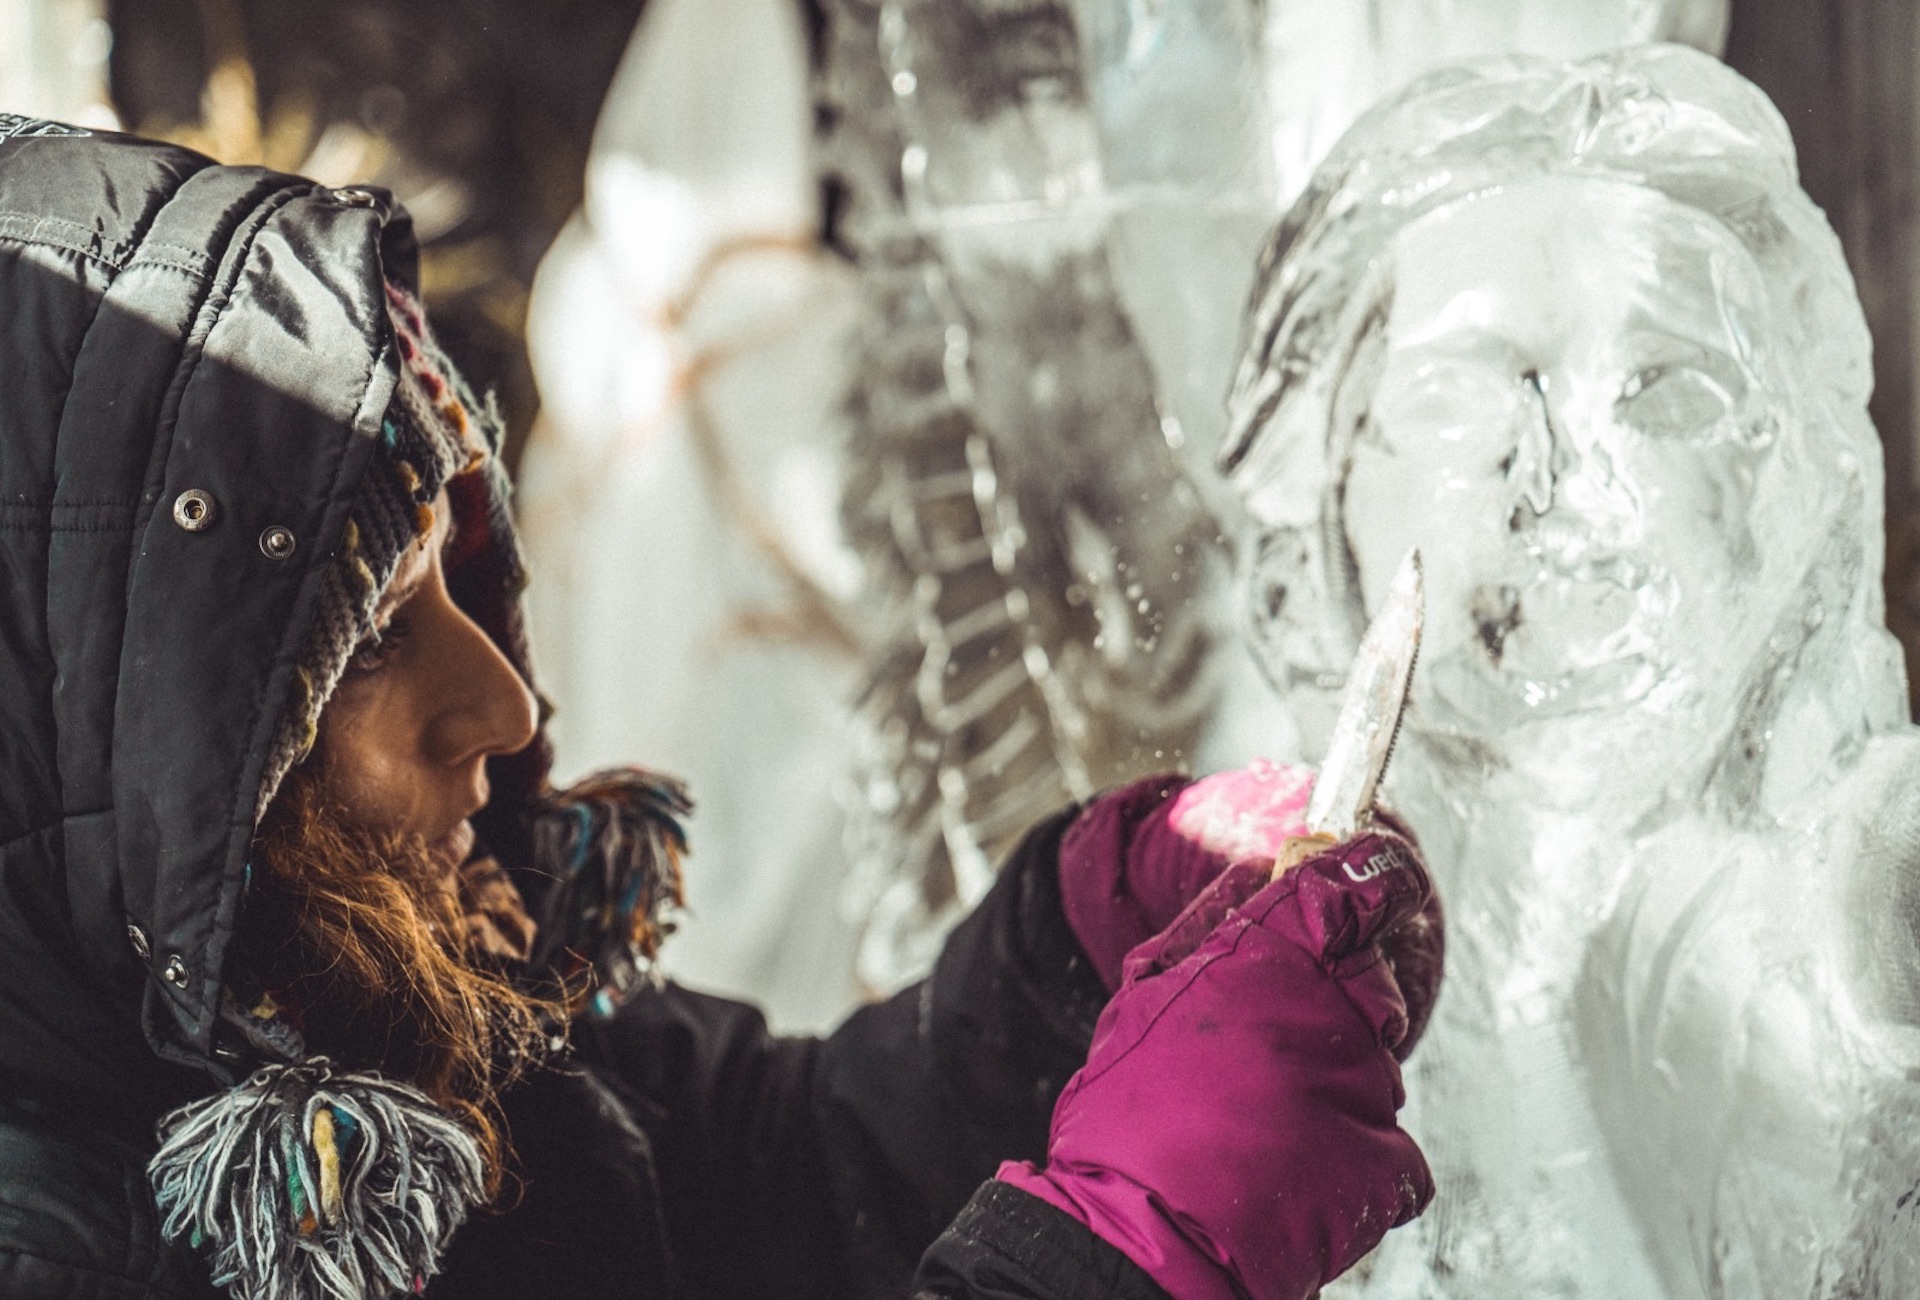 ice carving angel